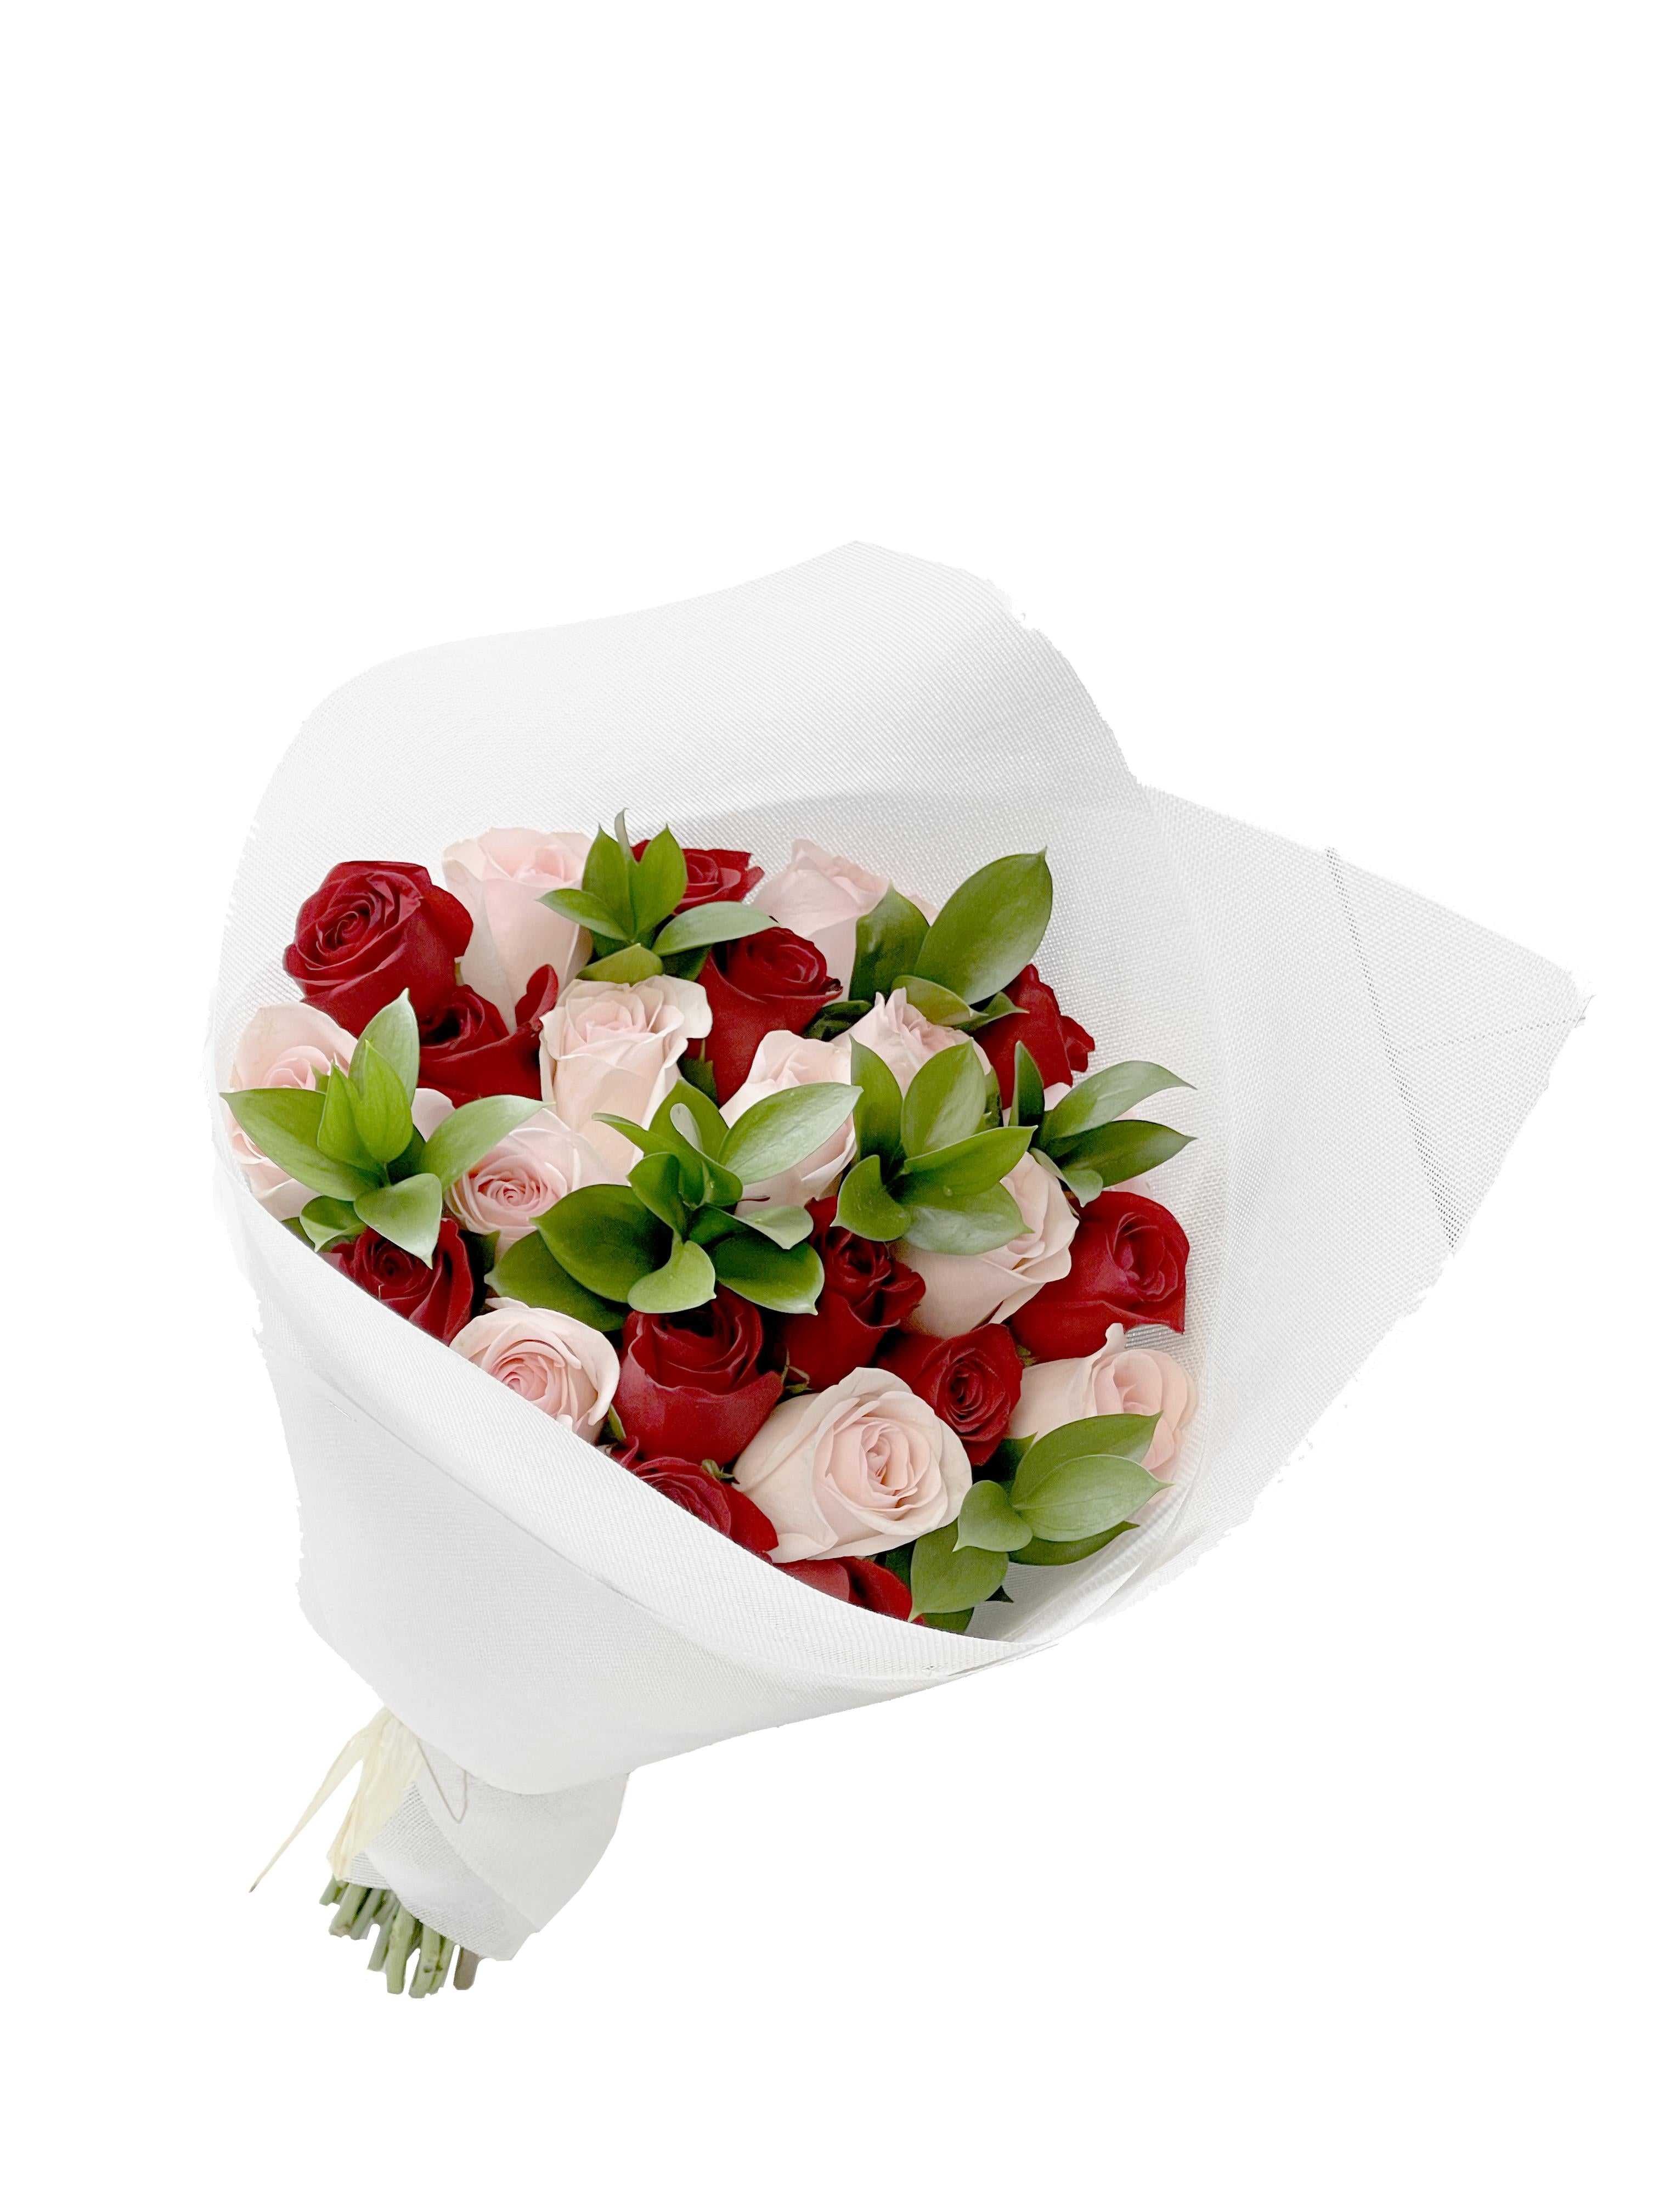 Valentine’s Day - 2 Dozen Roses-Charcuterie-Corporate Catering Toronto-Best Charcuterie-Catering Toronto-Cured Catering